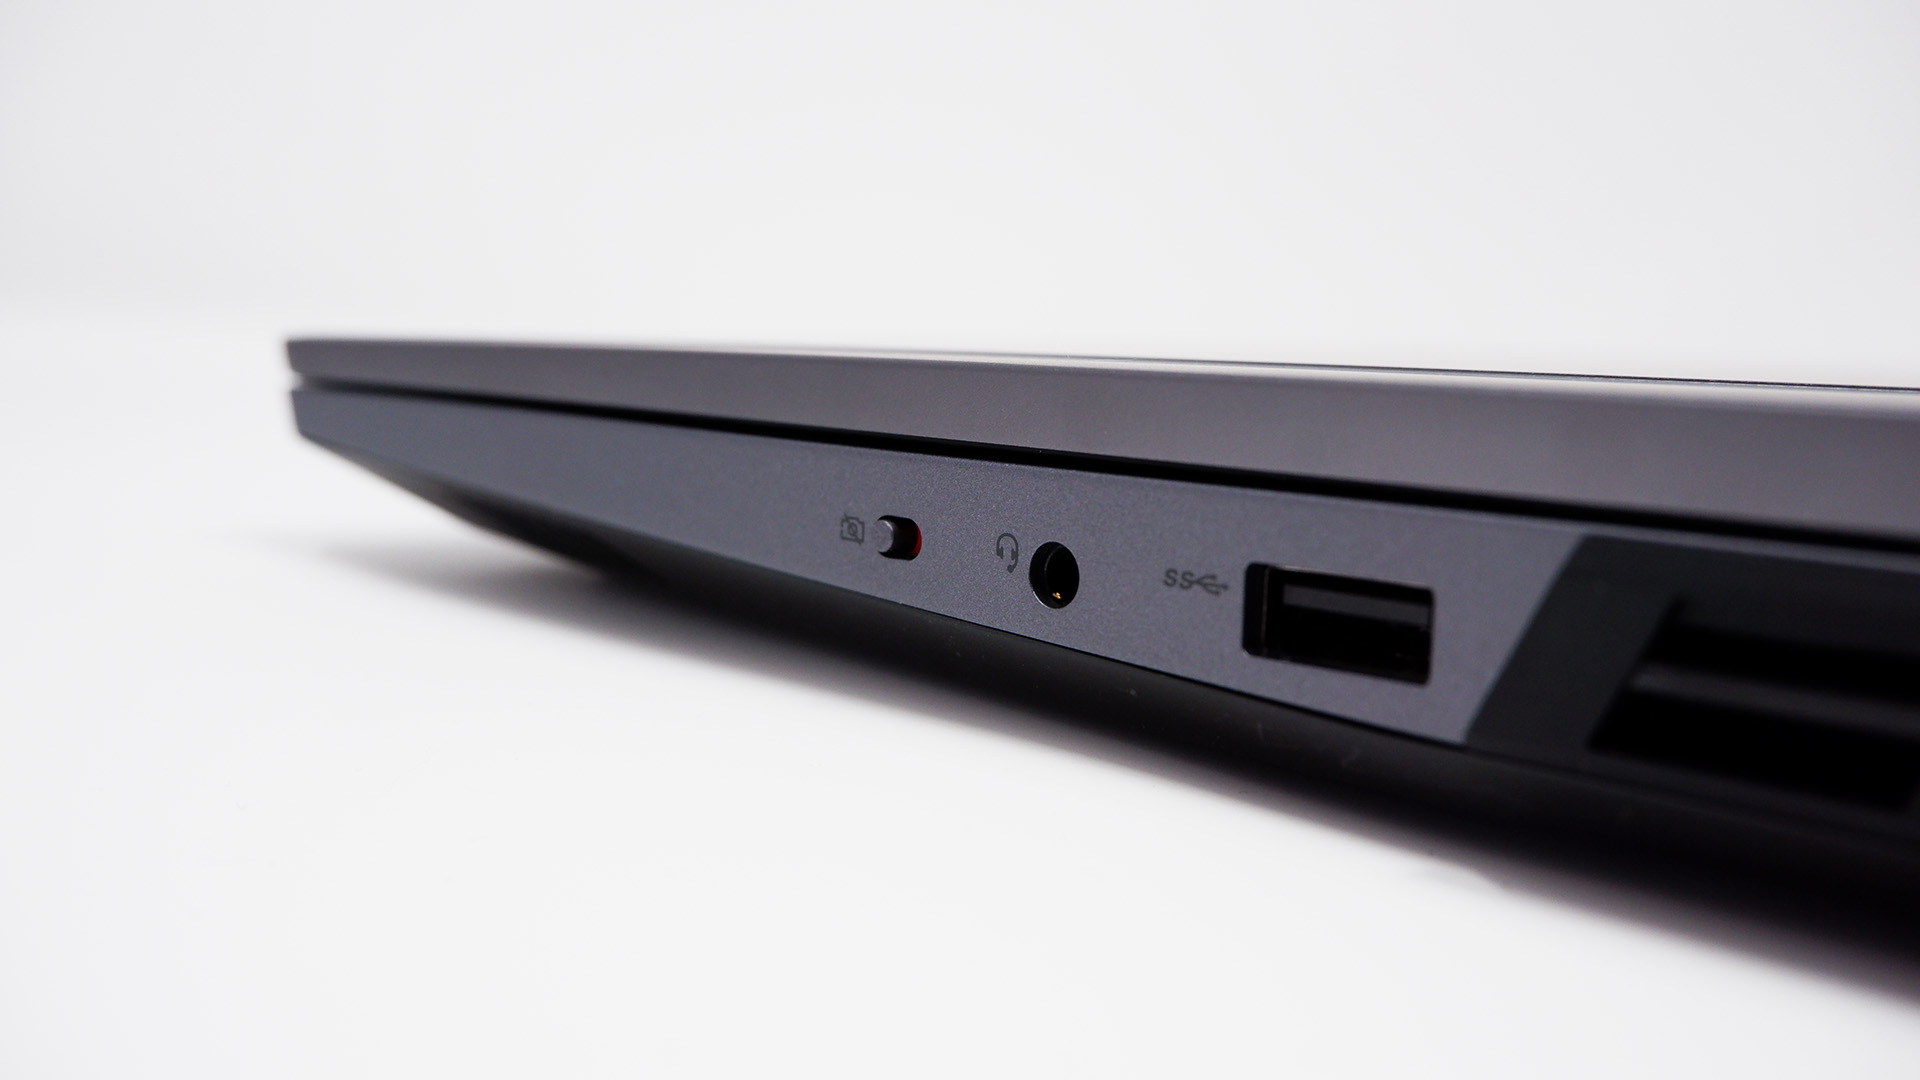 The side ports on the Lenovo Legion 5 Pro 16 gaming laptop